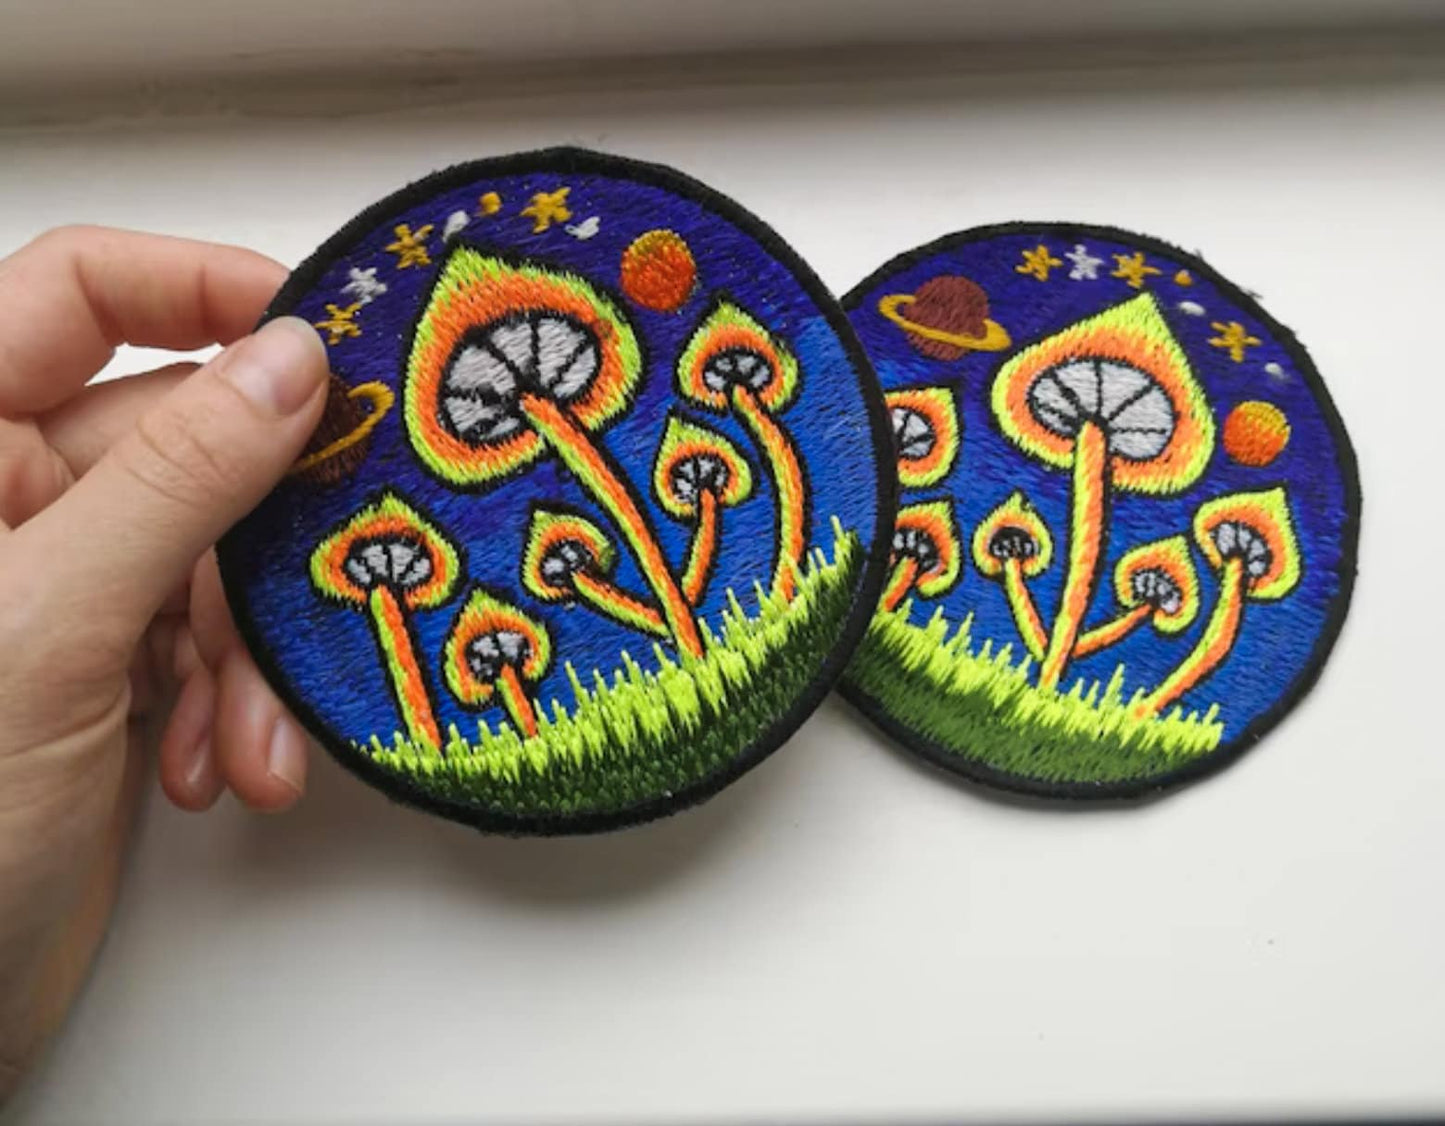 Magic Mushroom patch 3.5 inch size psilocybin planet shroom blacklight glowing sew on embroidery psychedelic goapatch Maria Sabina art